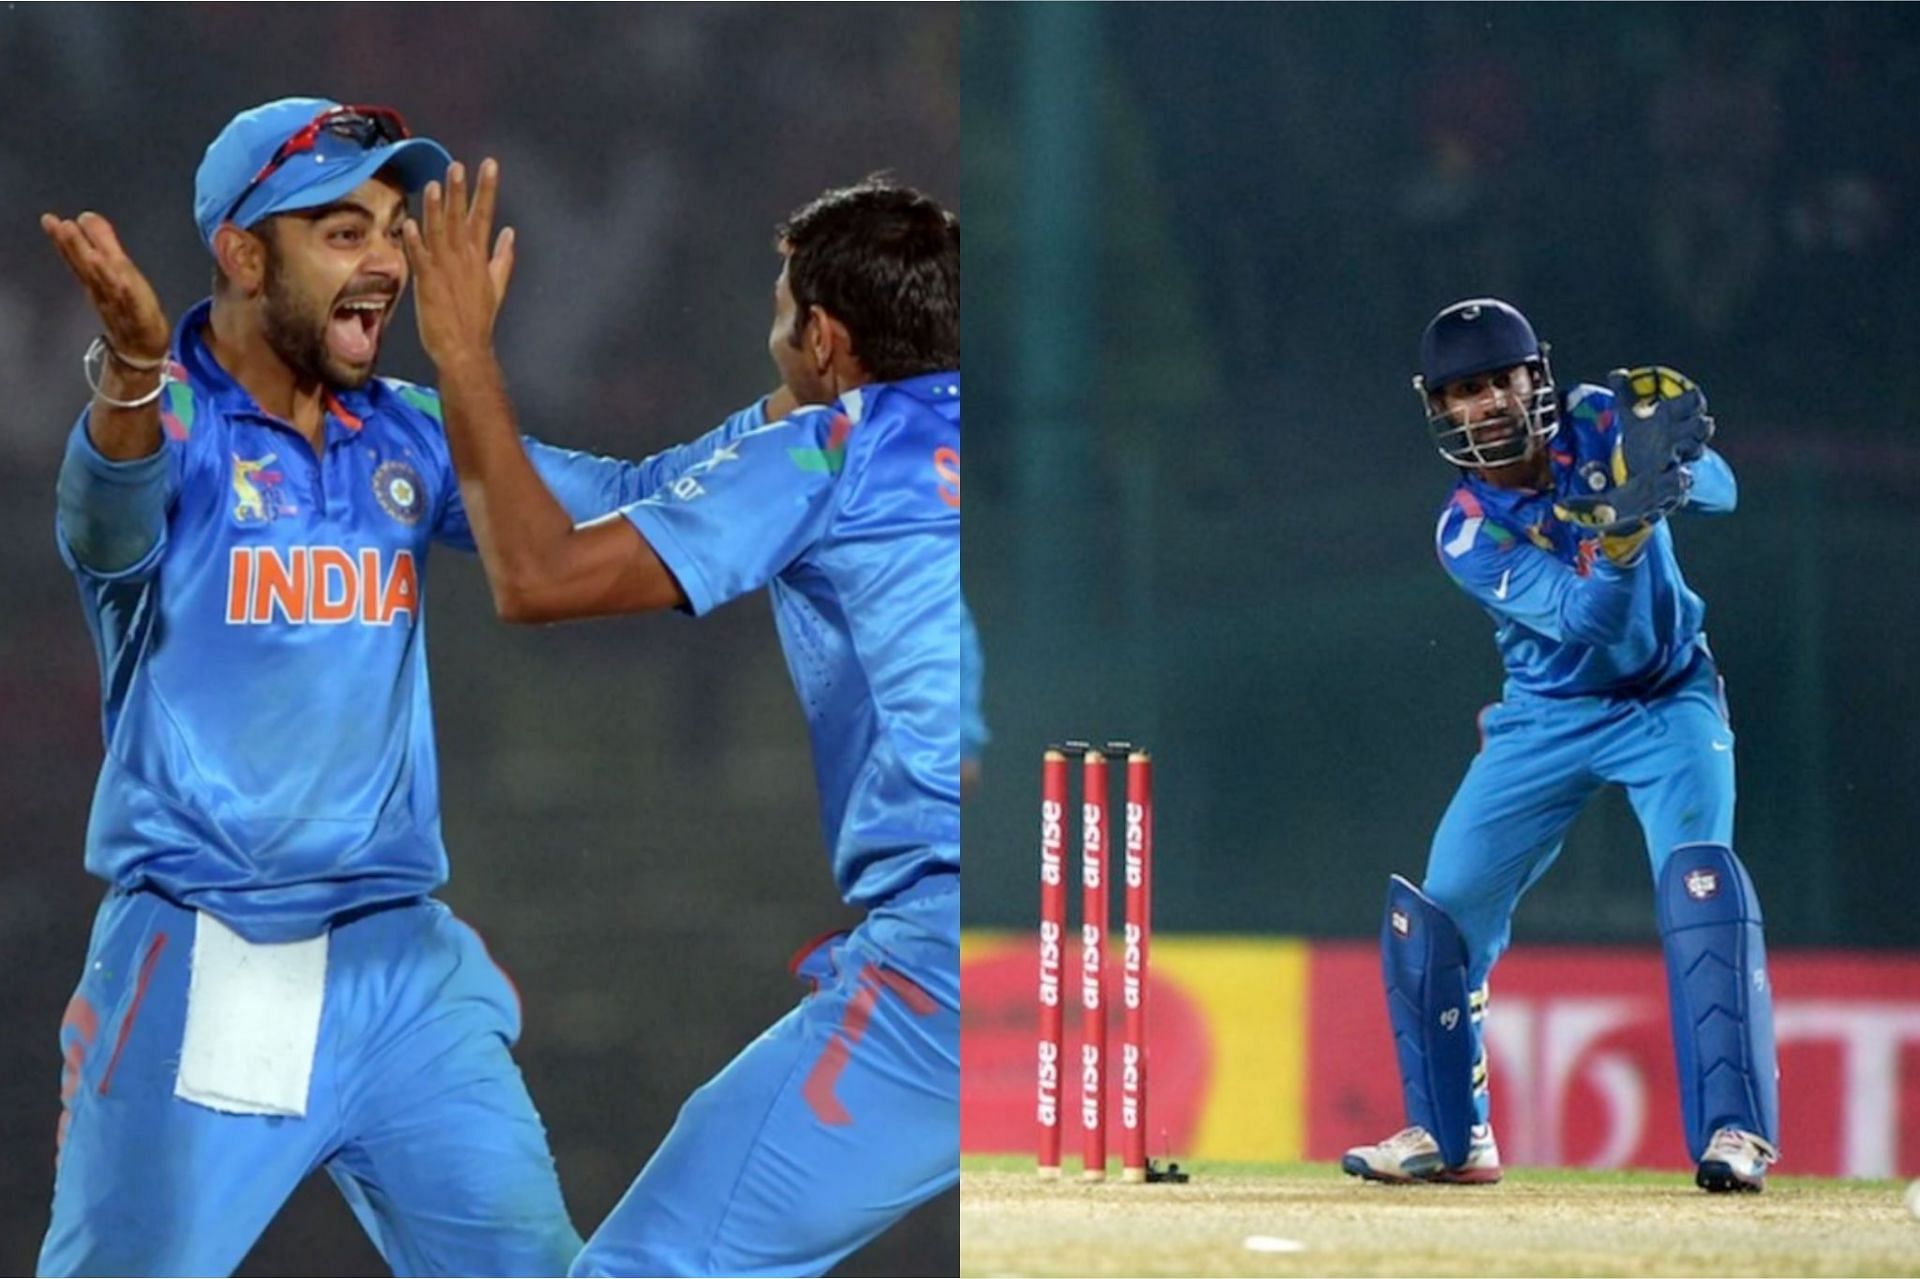 India played their last ODI Asia Cup game against Sri Lanka in 2014 [Getty Images]